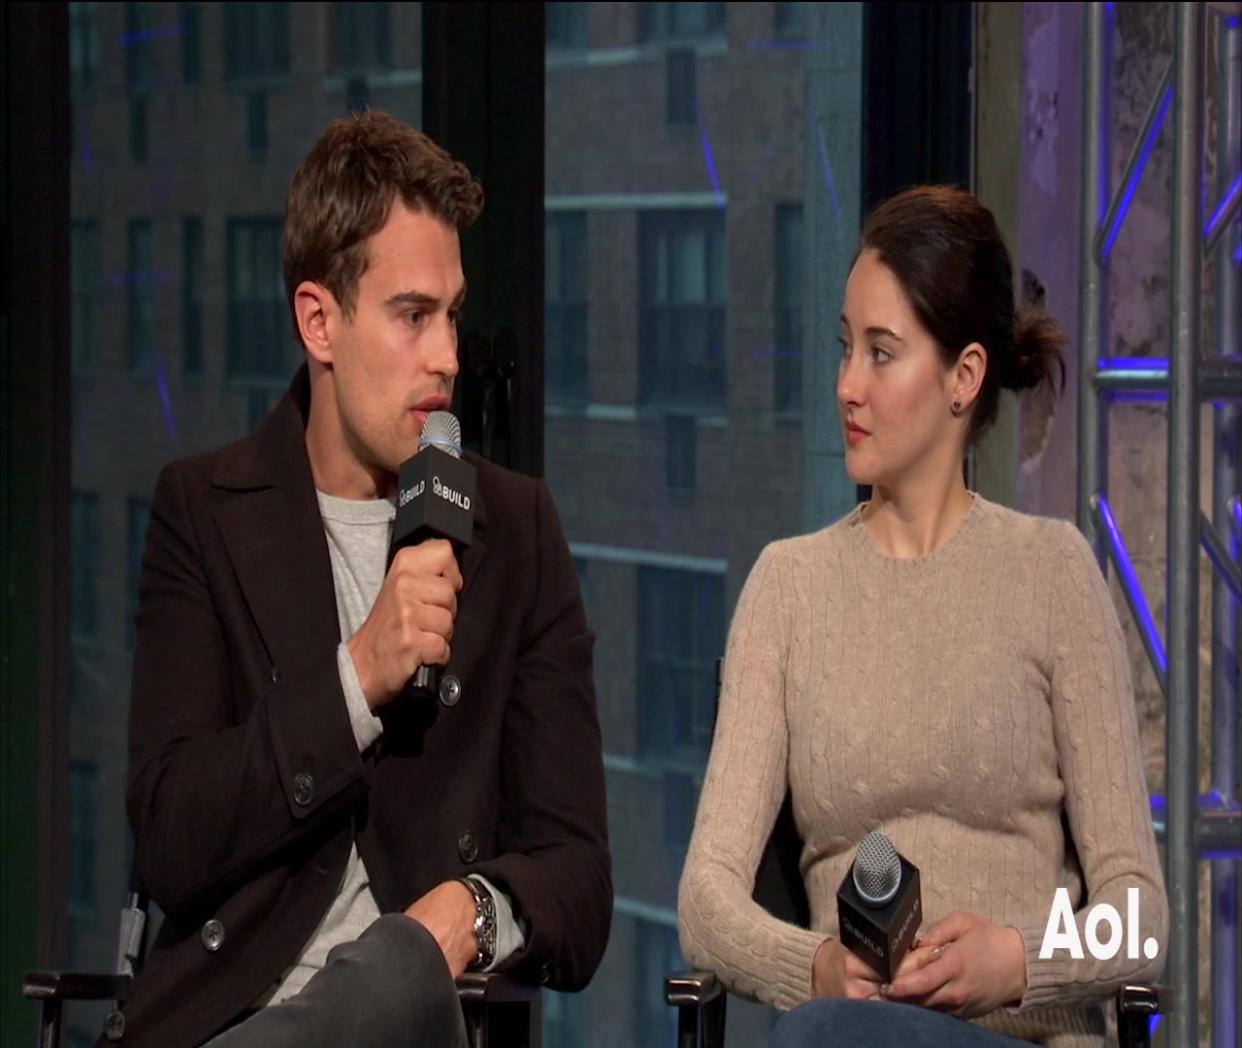 Shailene Woodley and Theo James on Working Together in The Divergent Series